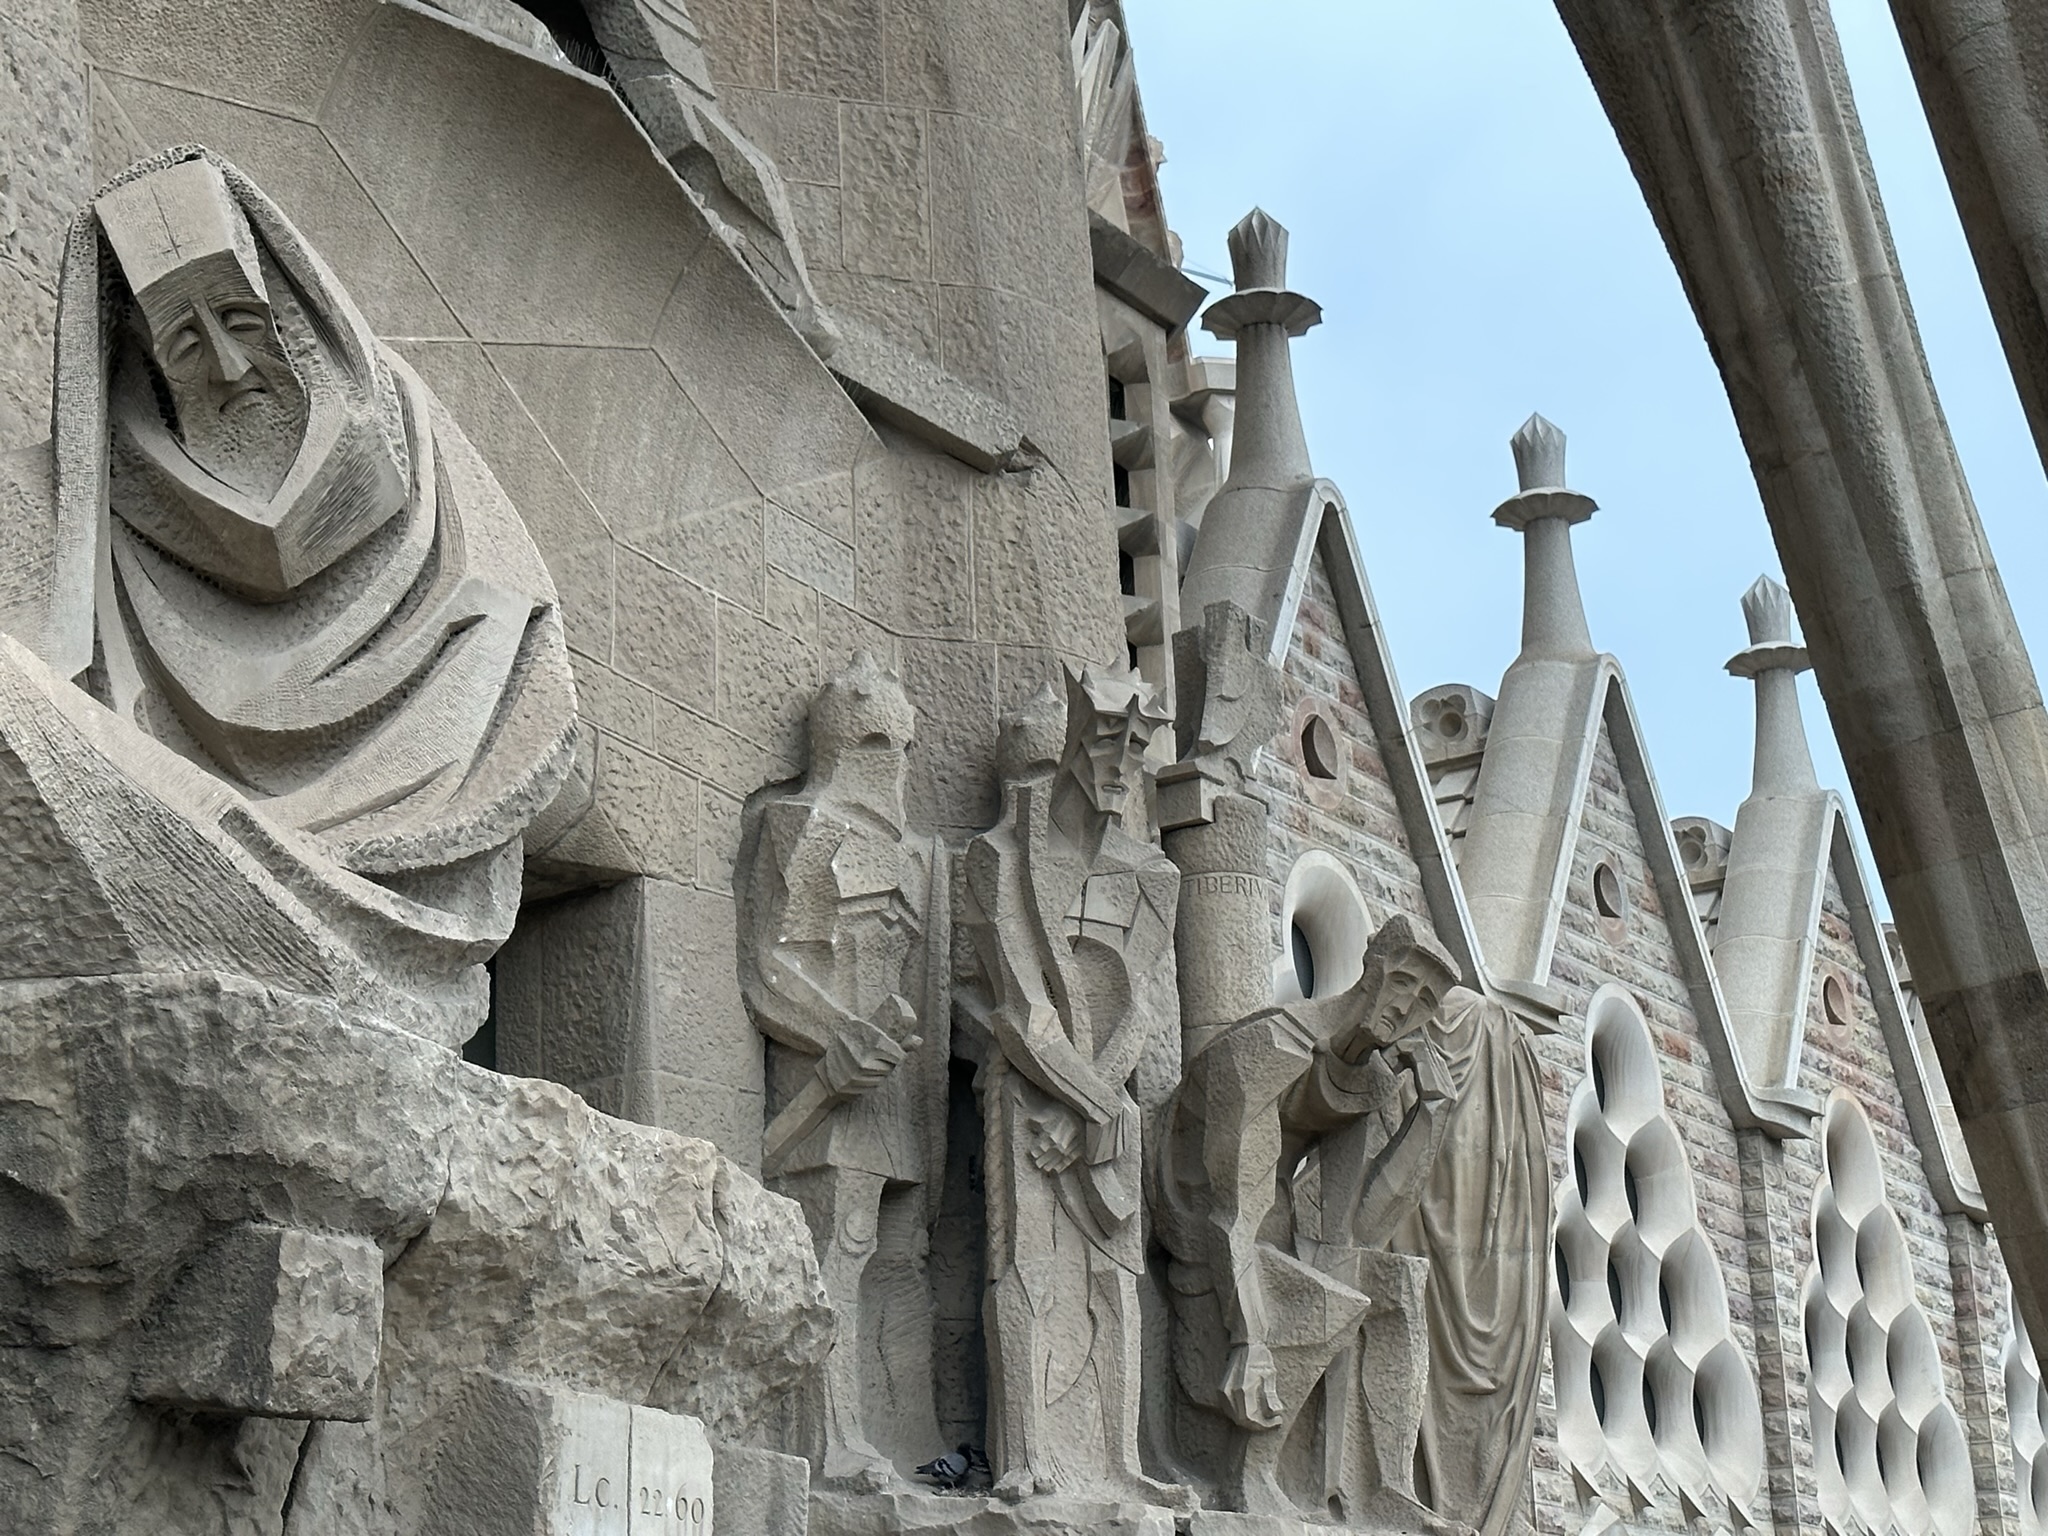 Each side of the basilica represents a different era or saga, each having different sculpture styles and a high level of detail